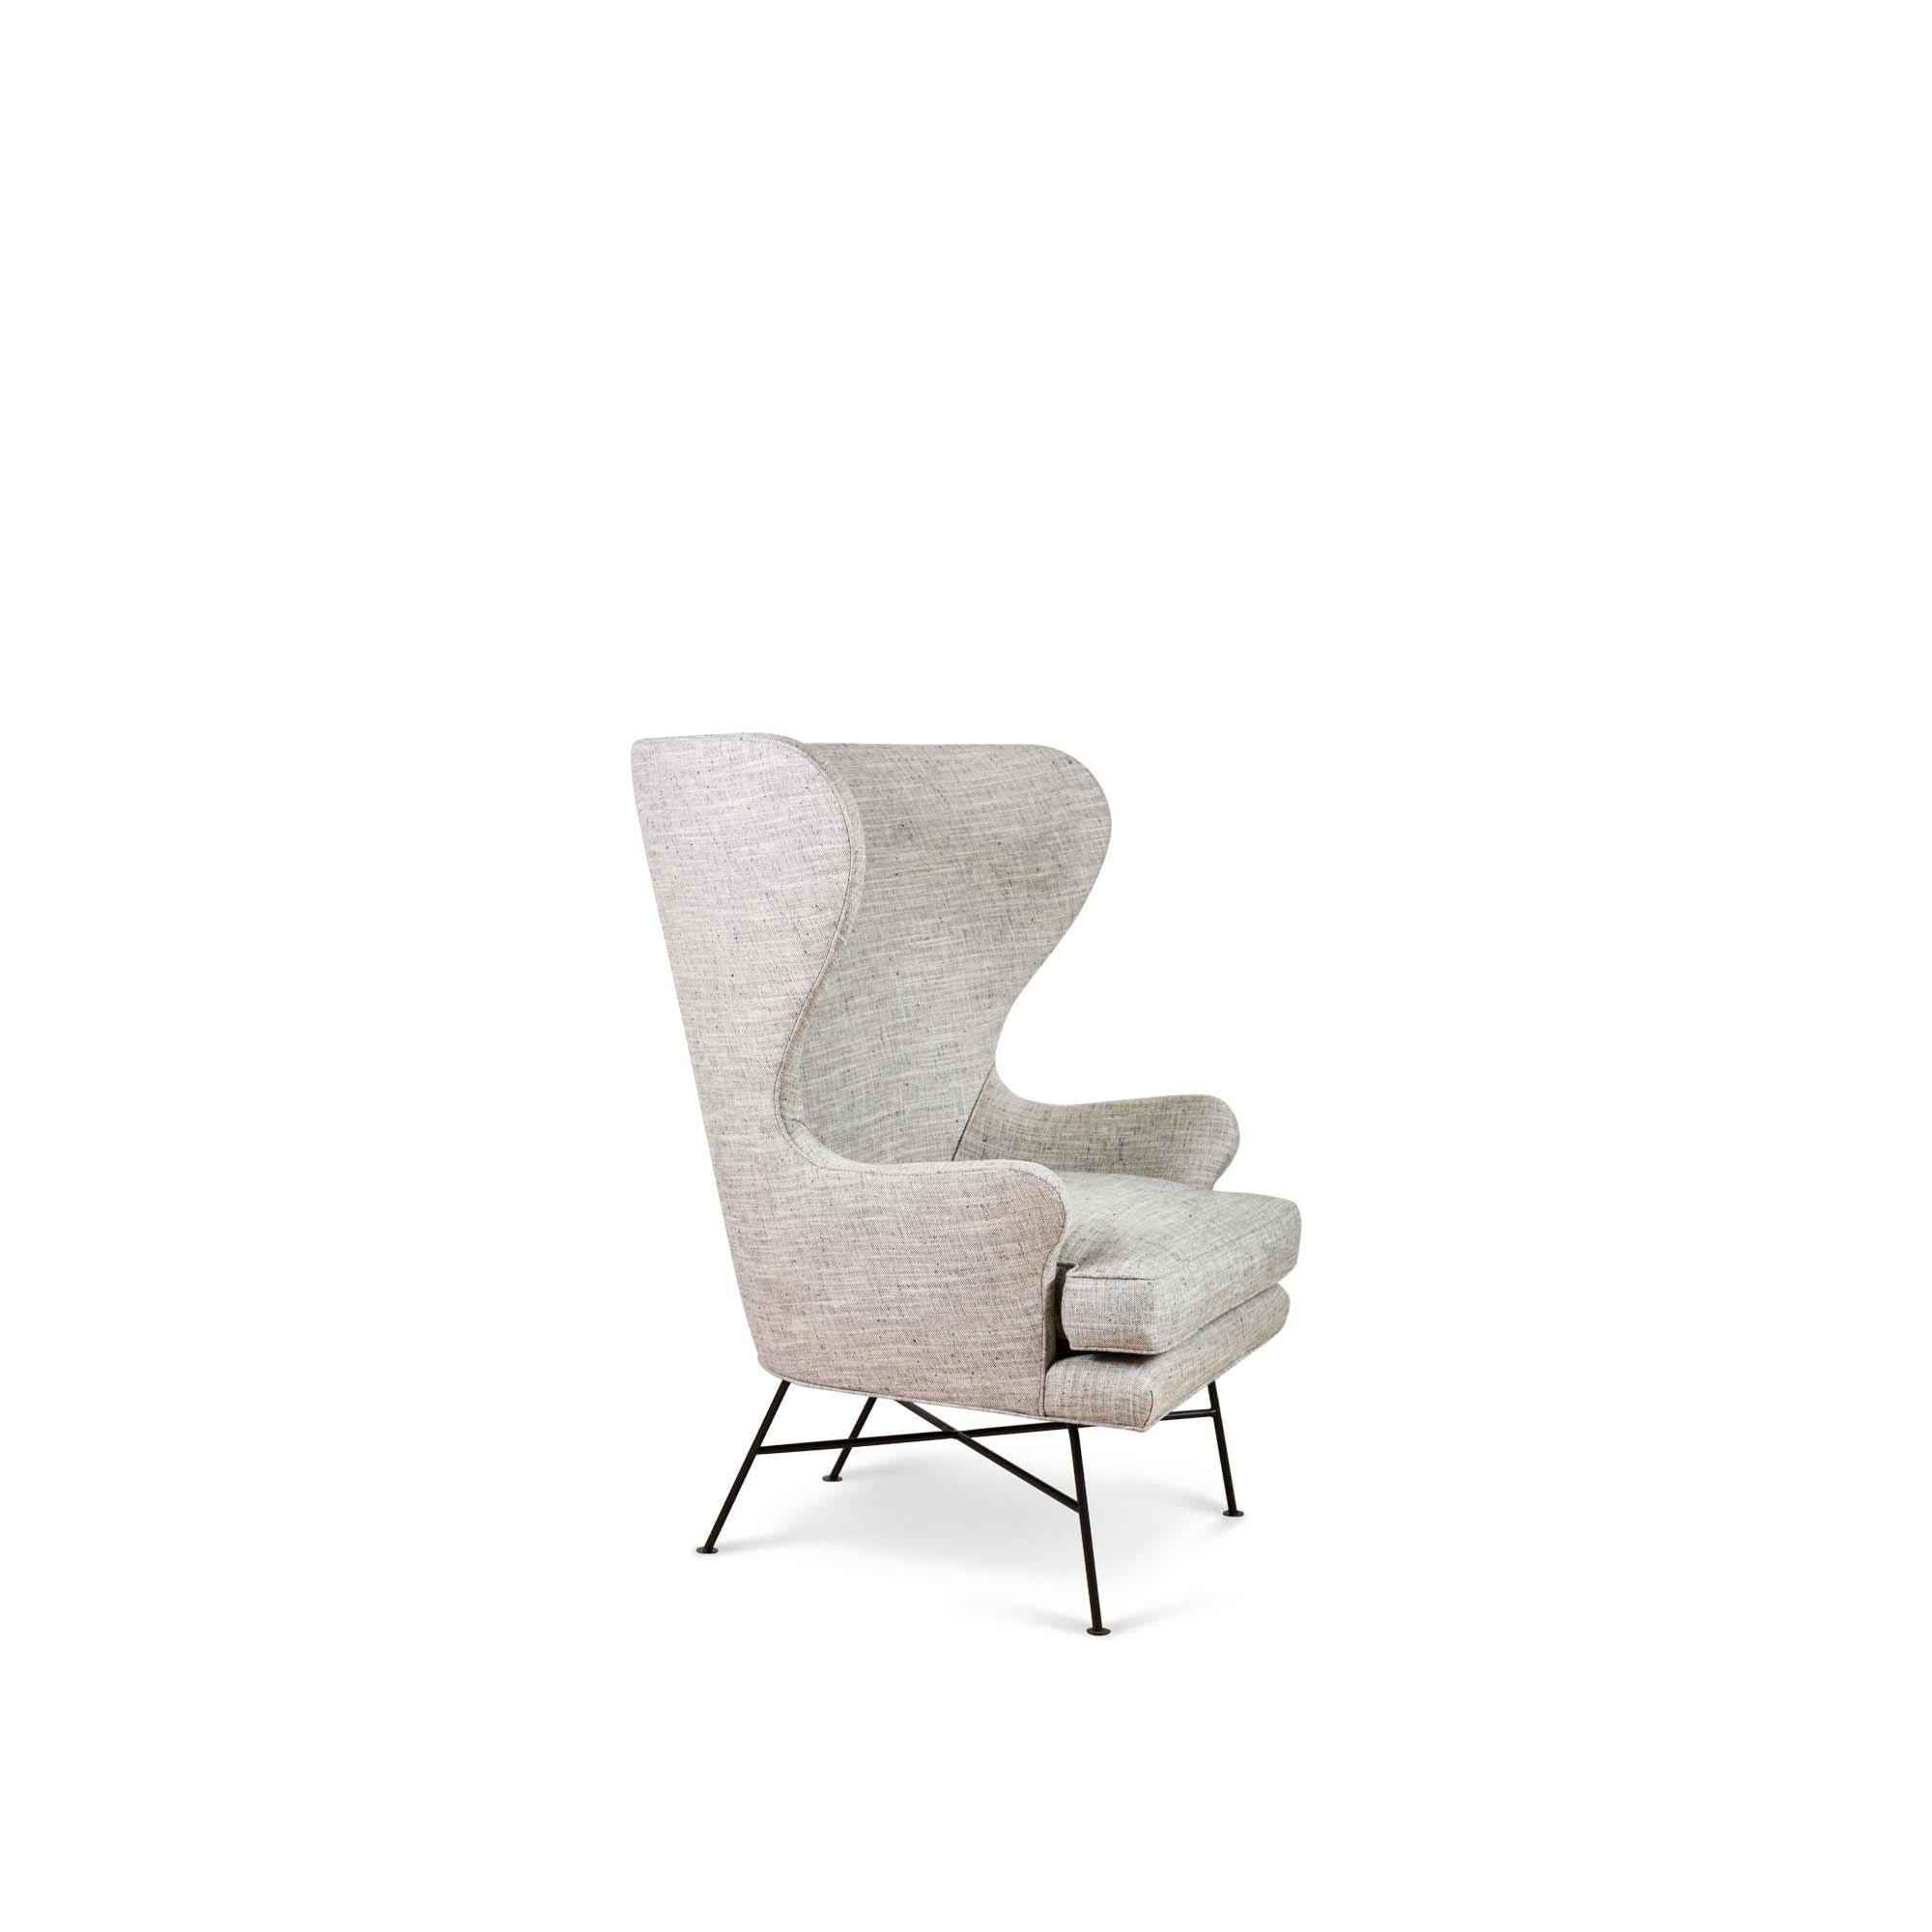 The highland wingback chair is a sculptural, wide-scale chair with a minimal metal base and down-wrapped seat cushion.

The Lawson-Fenning Collection is designed and handmade in Los Angeles, California. Reach out to discover what options are